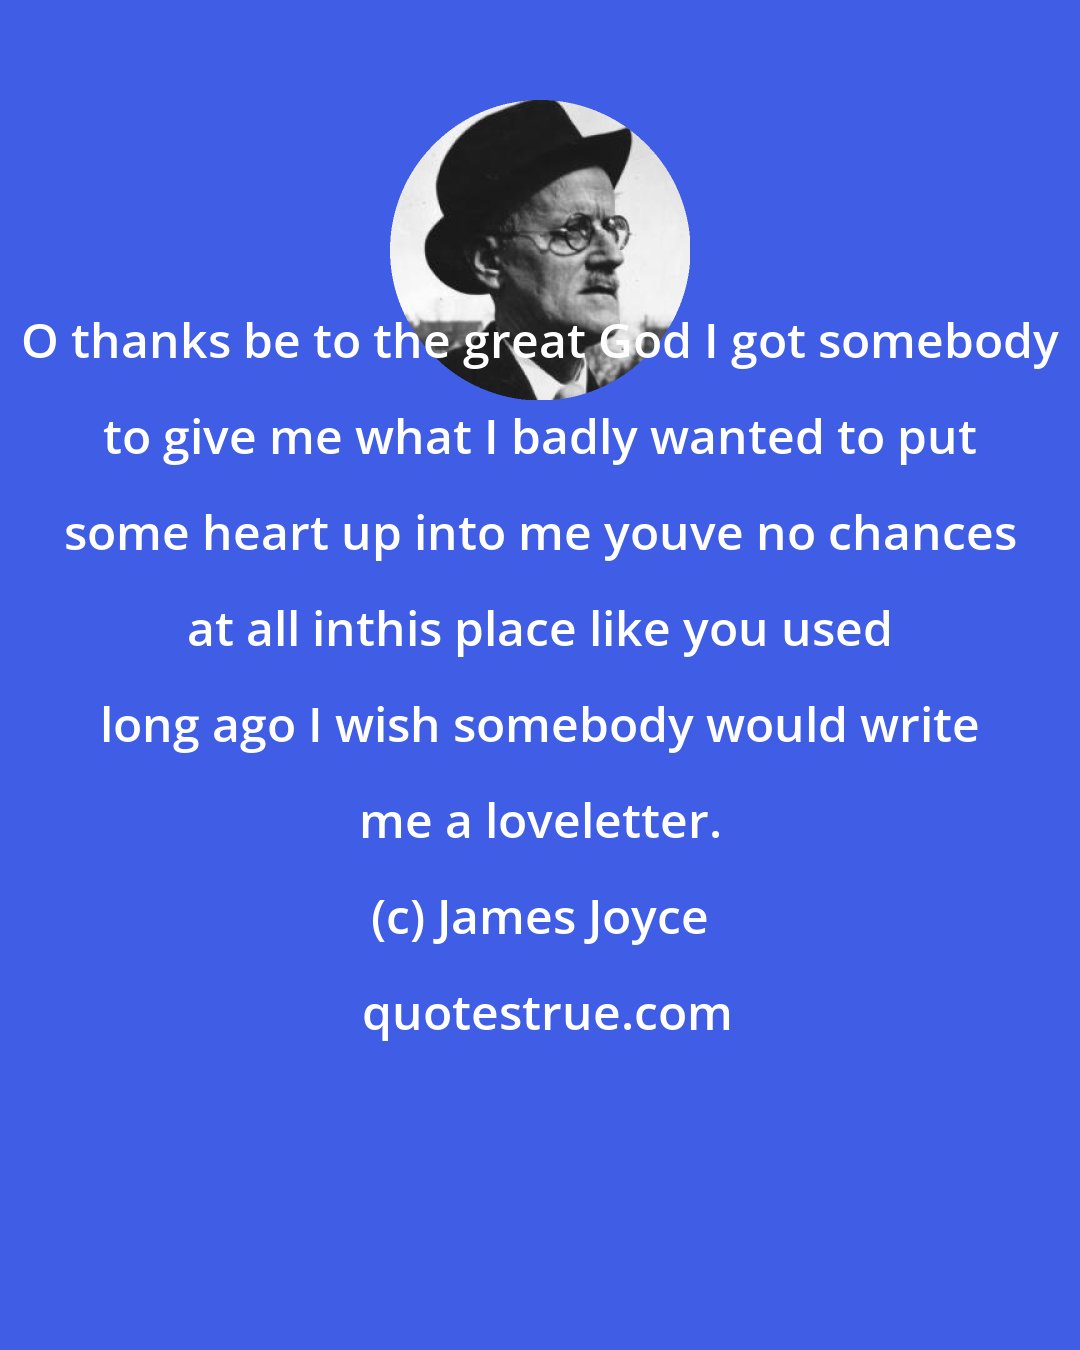 James Joyce: O thanks be to the great God I got somebody to give me what I badly wanted to put some heart up into me youve no chances at all inthis place like you used long ago I wish somebody would write me a loveletter.